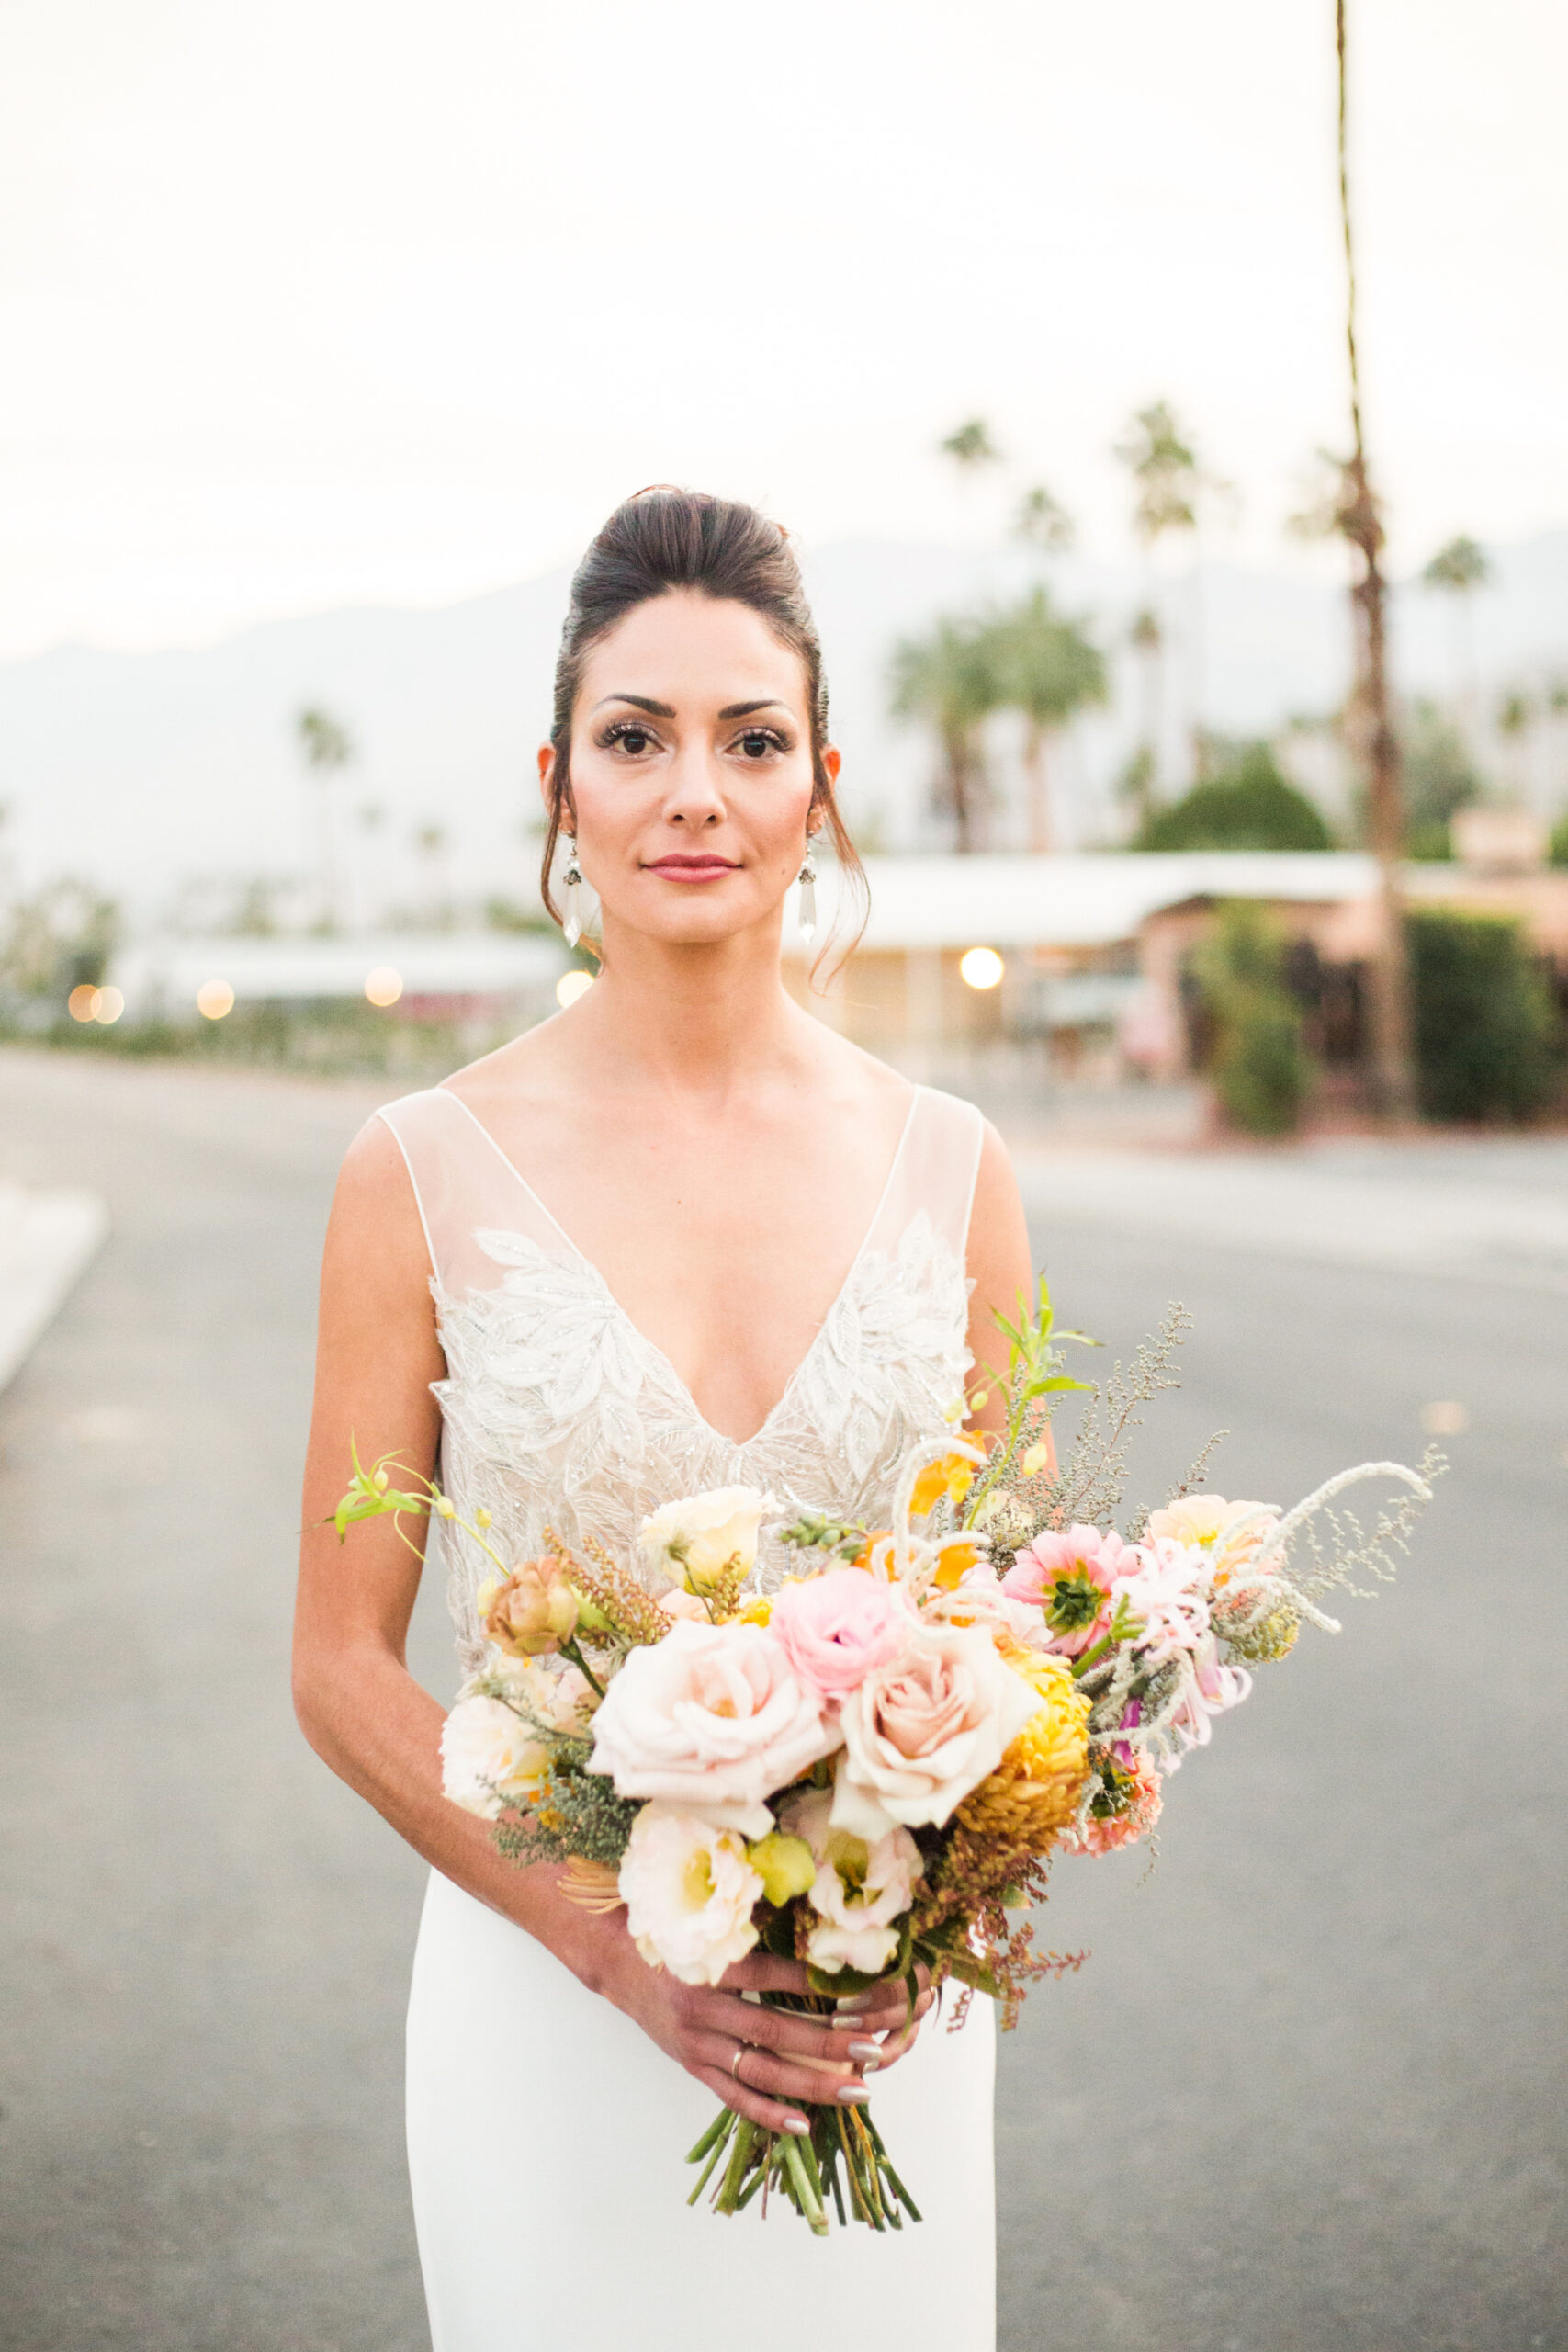 Beautiful bride with colorful desert inspired boquet